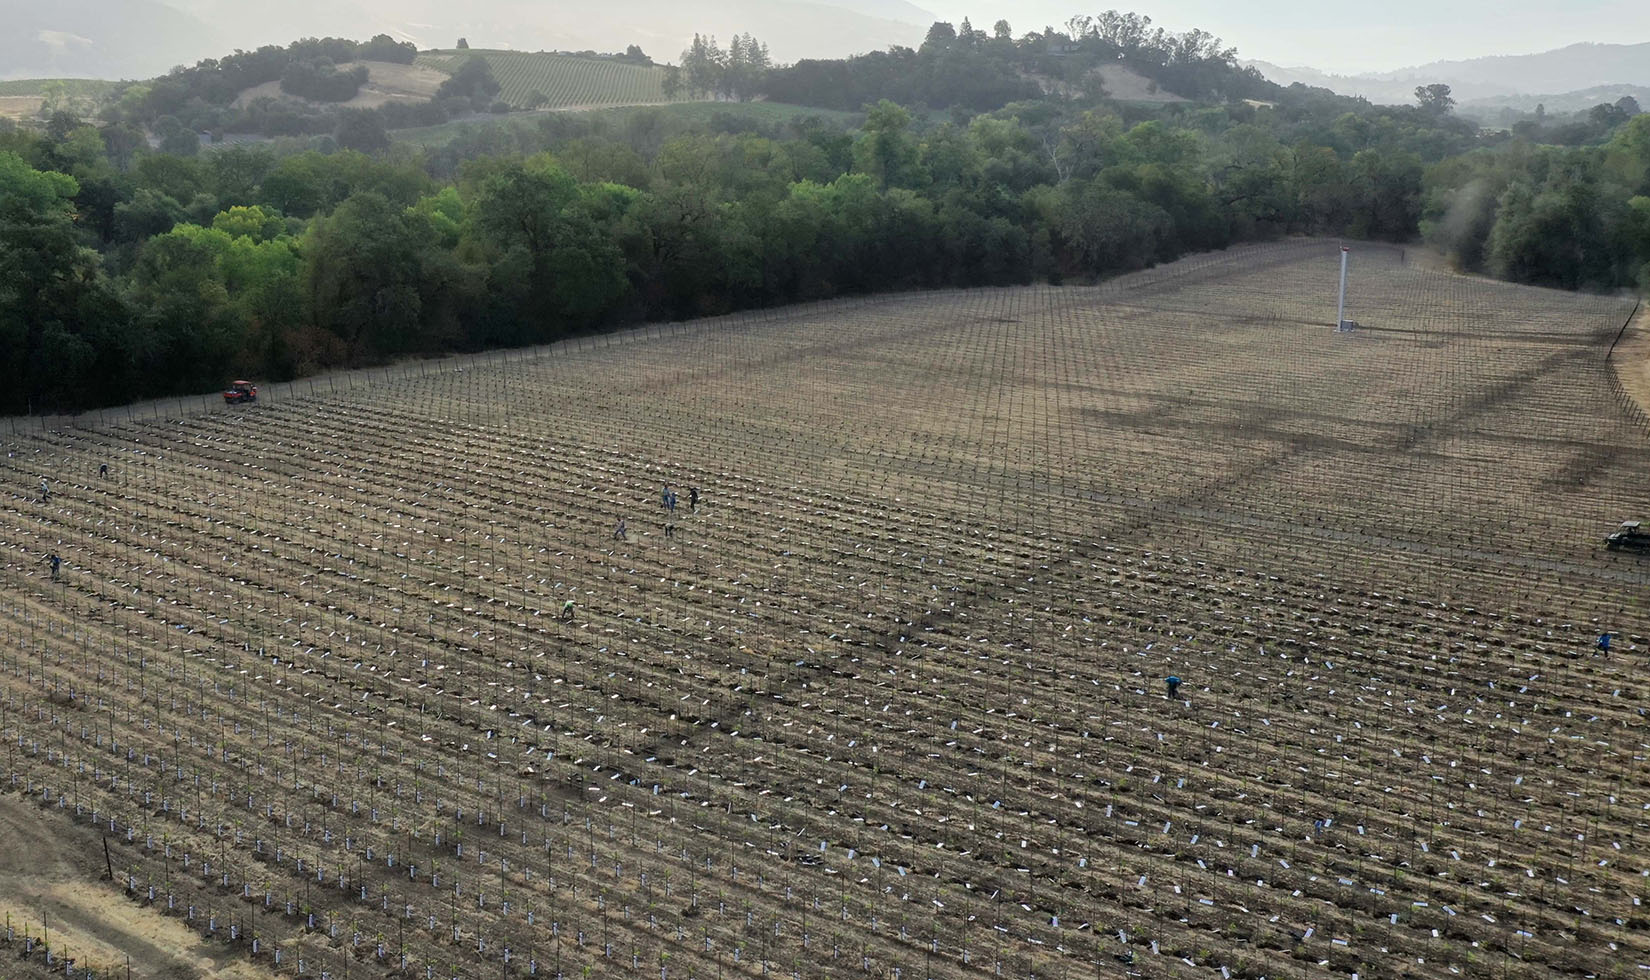 Aerial view of a vineyard block being replanted with people and tractors